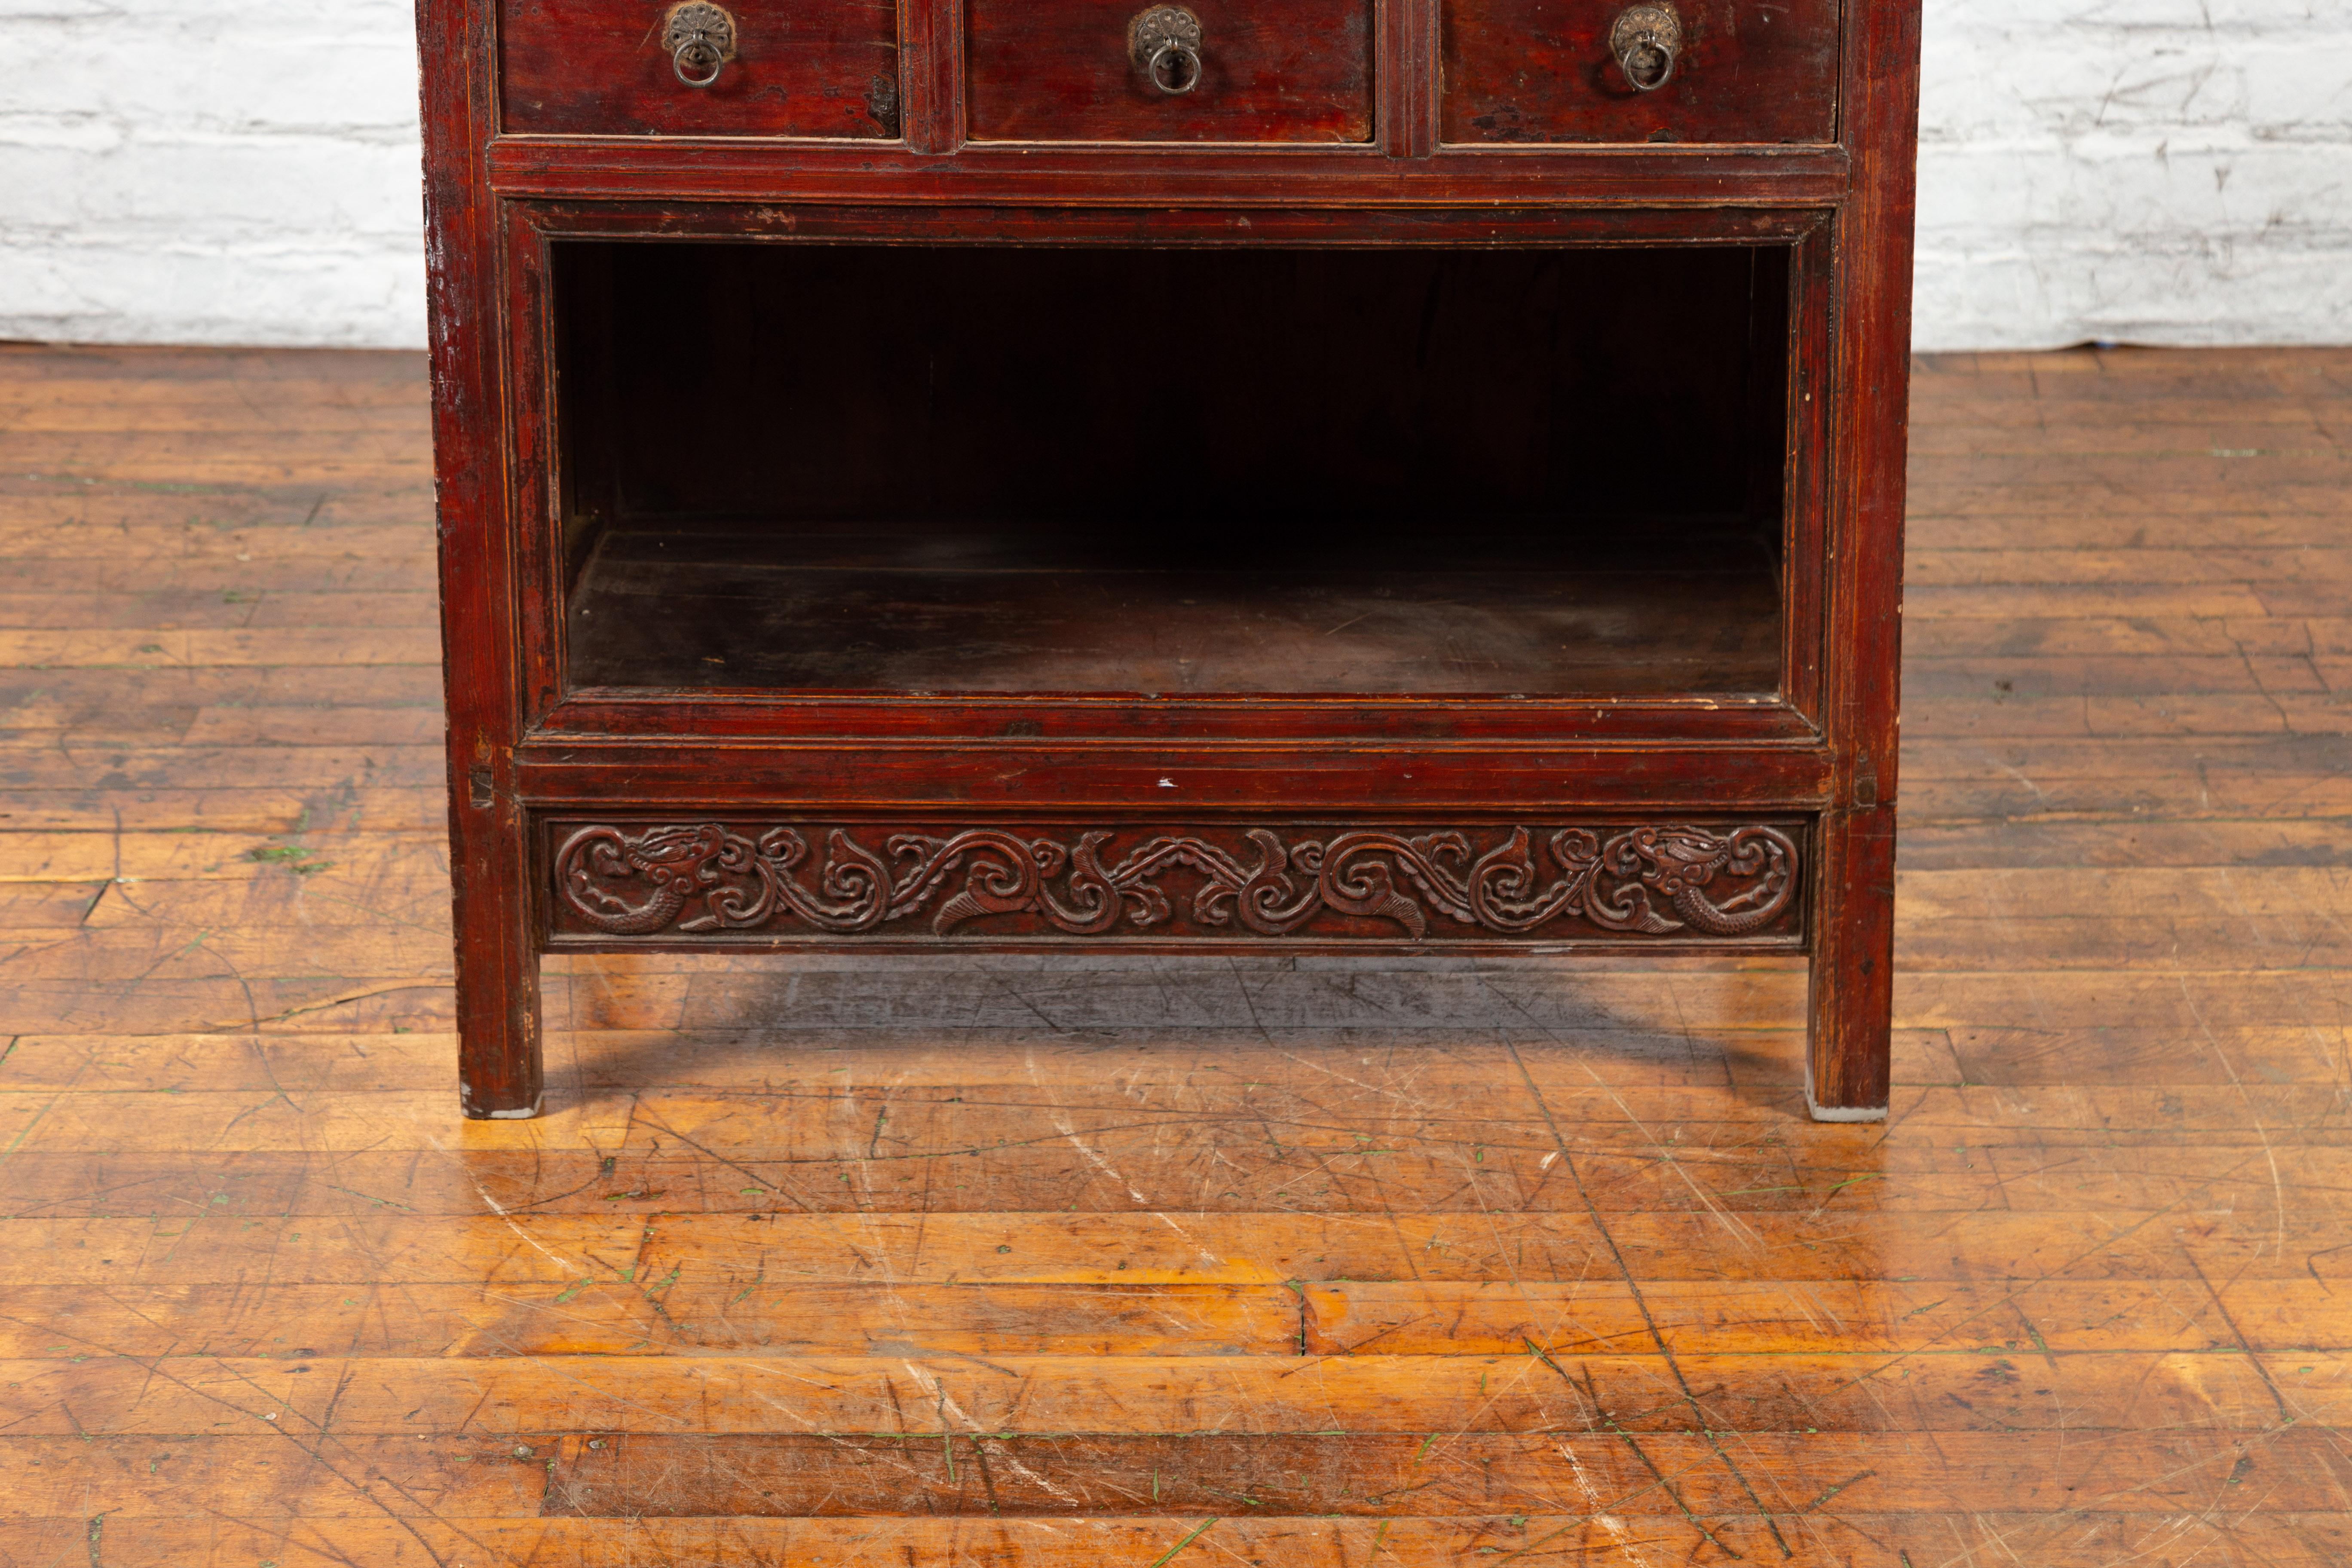 Chinese Qing Dynasty 19th Century Lacquered Cabinet with Carved Dragon Motifs For Sale 3